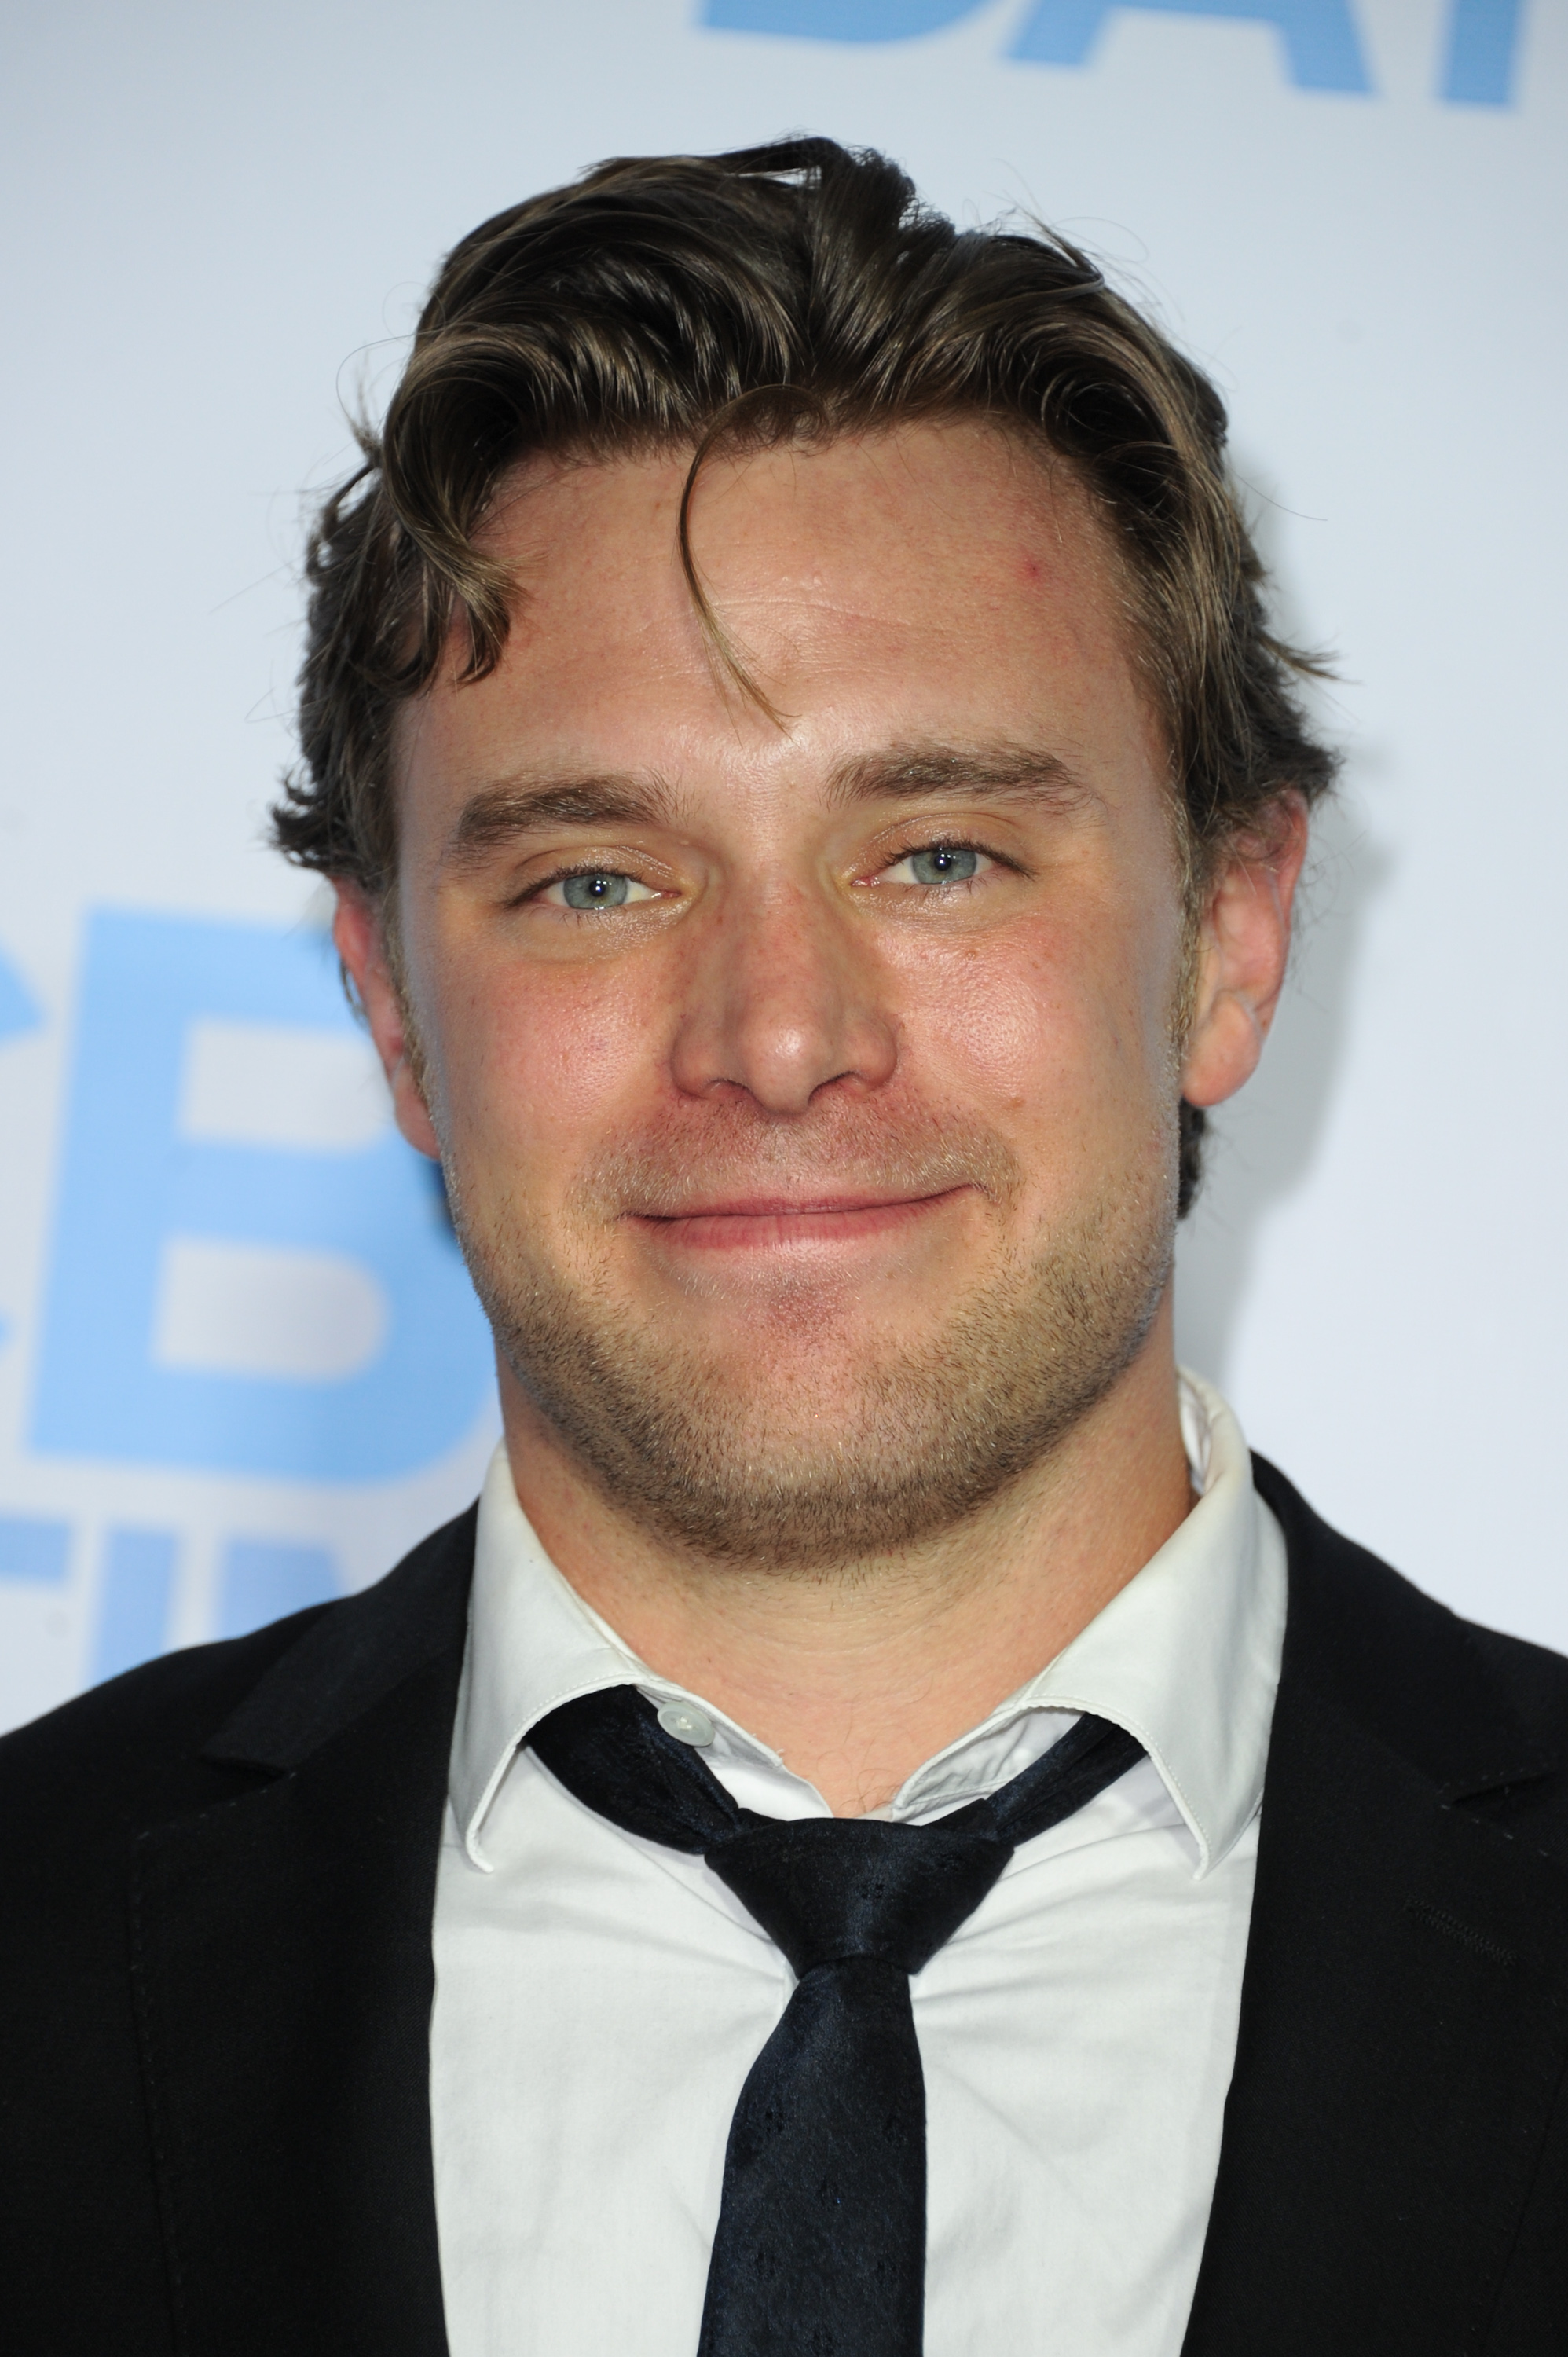 Billy Miller at the 40th Annual Daytime Entertaimment Emmy Awards in Beverly Hills, 2013 | Source: Getty Images